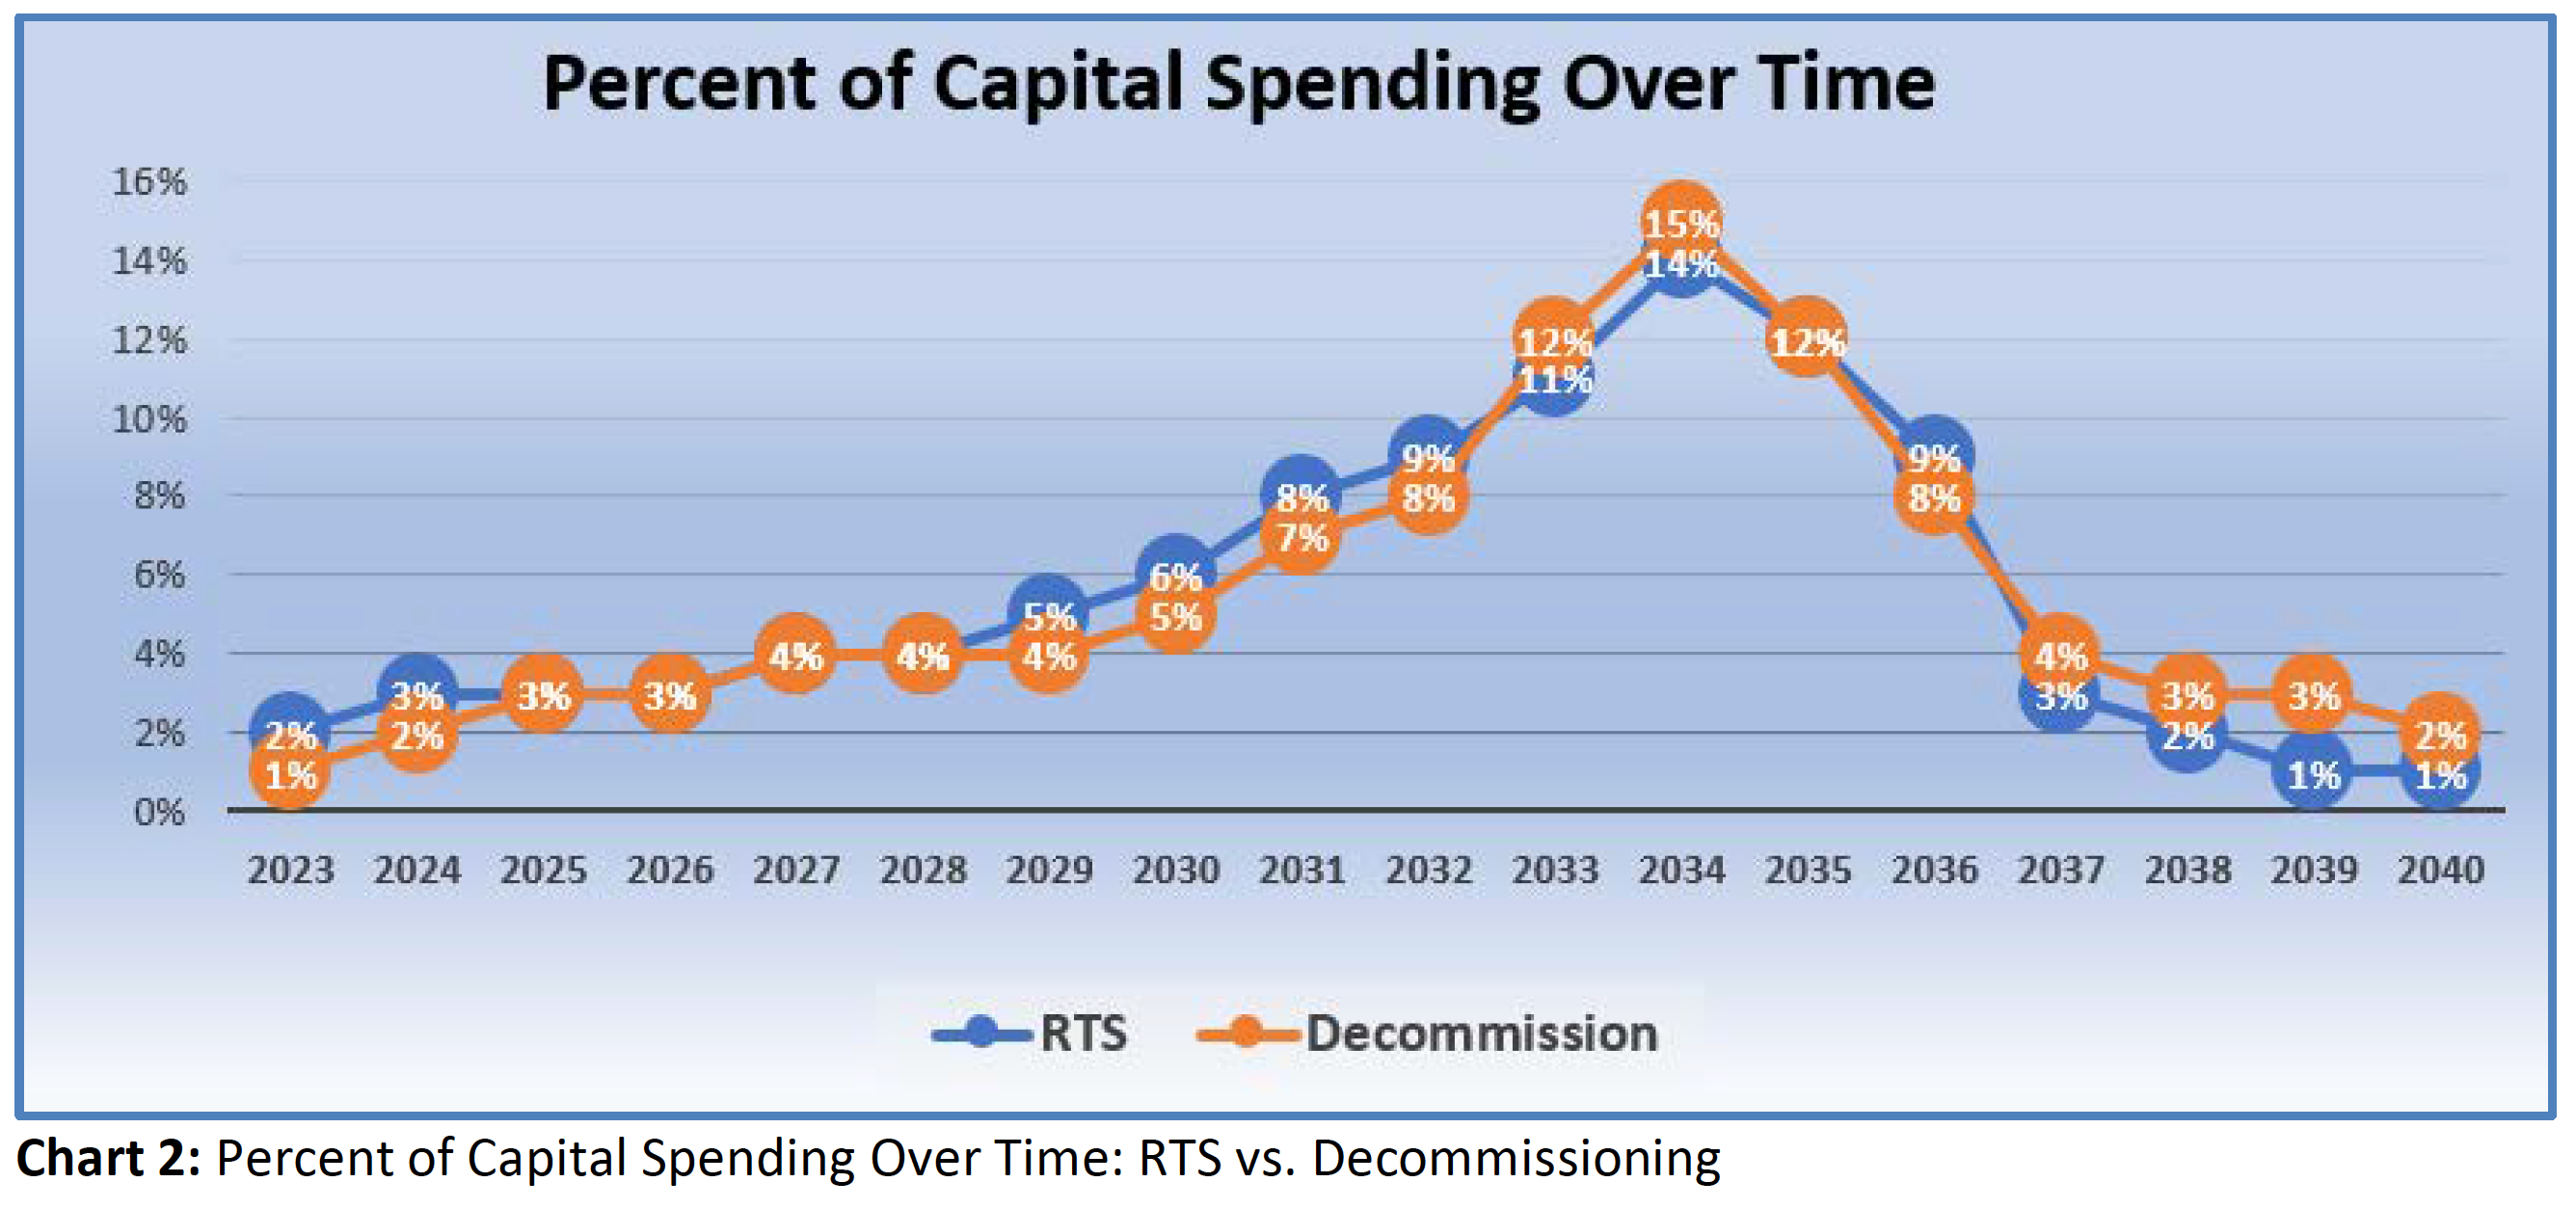 Percent of Capital Spending over time